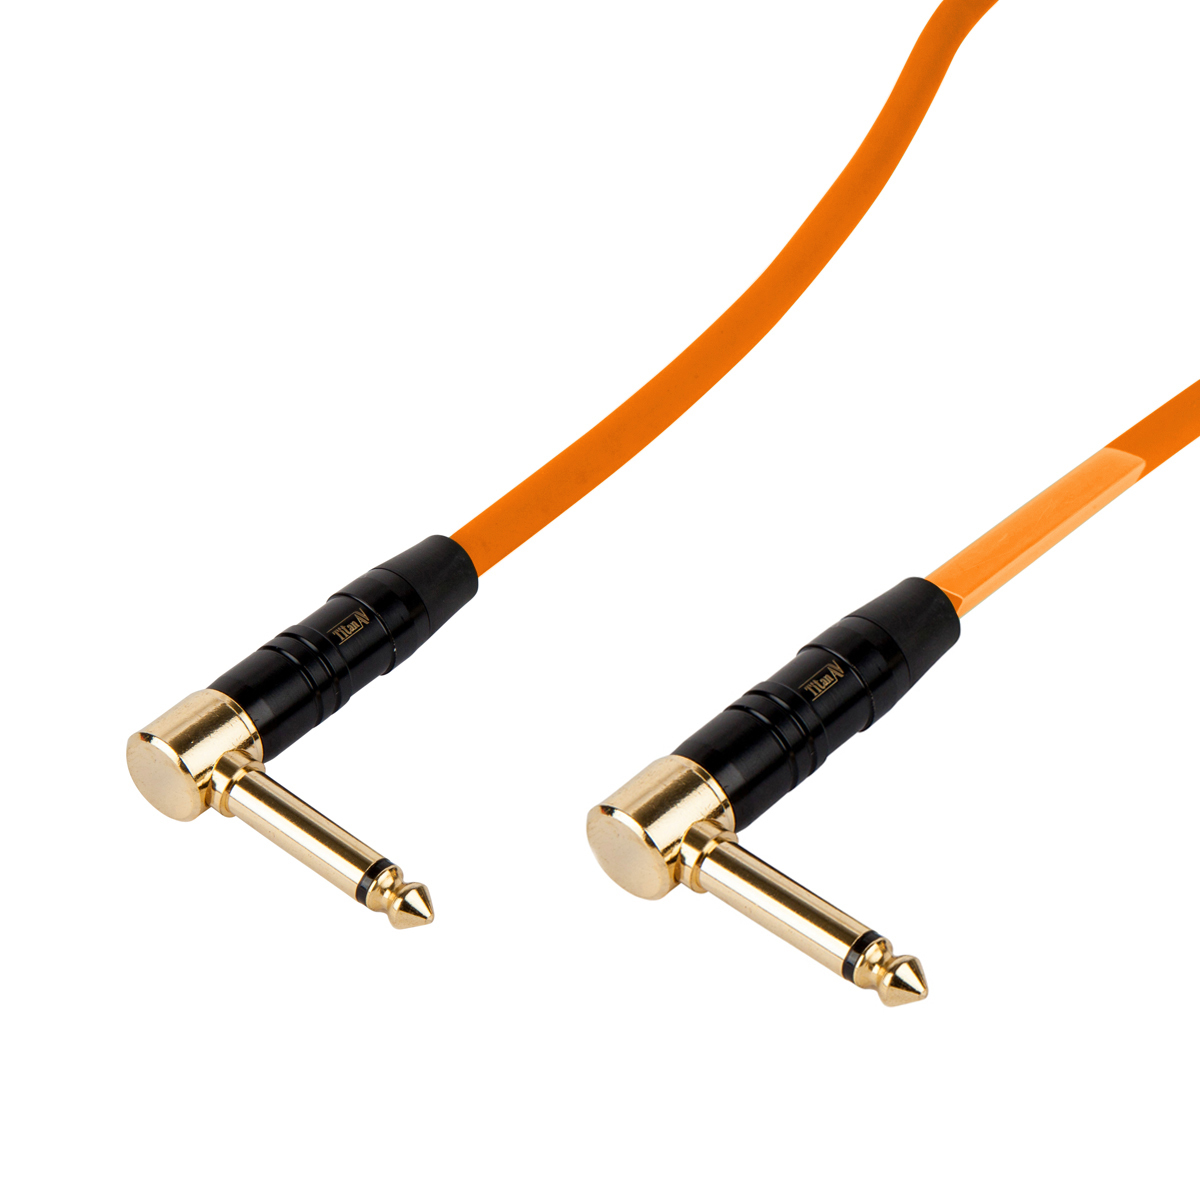 0.25m Guitar Patch Lead 1/4" Right Angle Jack to 1/4" Right Angle Jack, 6.5mm Orange PVC Jacket